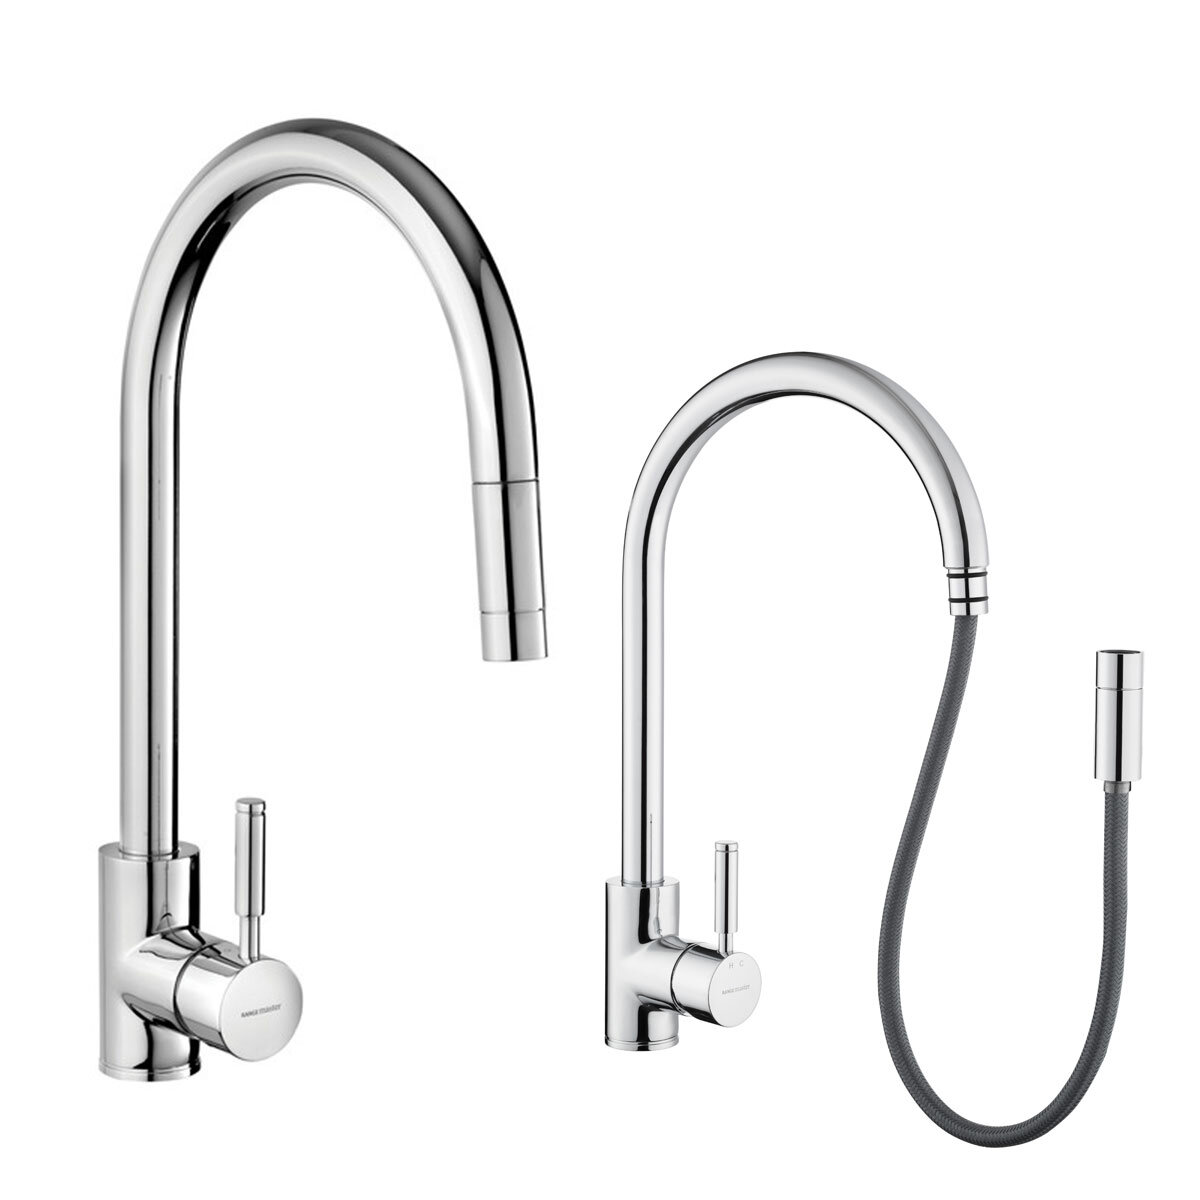 Rangemaster Aquatrend Single Lever Pull Out Tap in Chrome